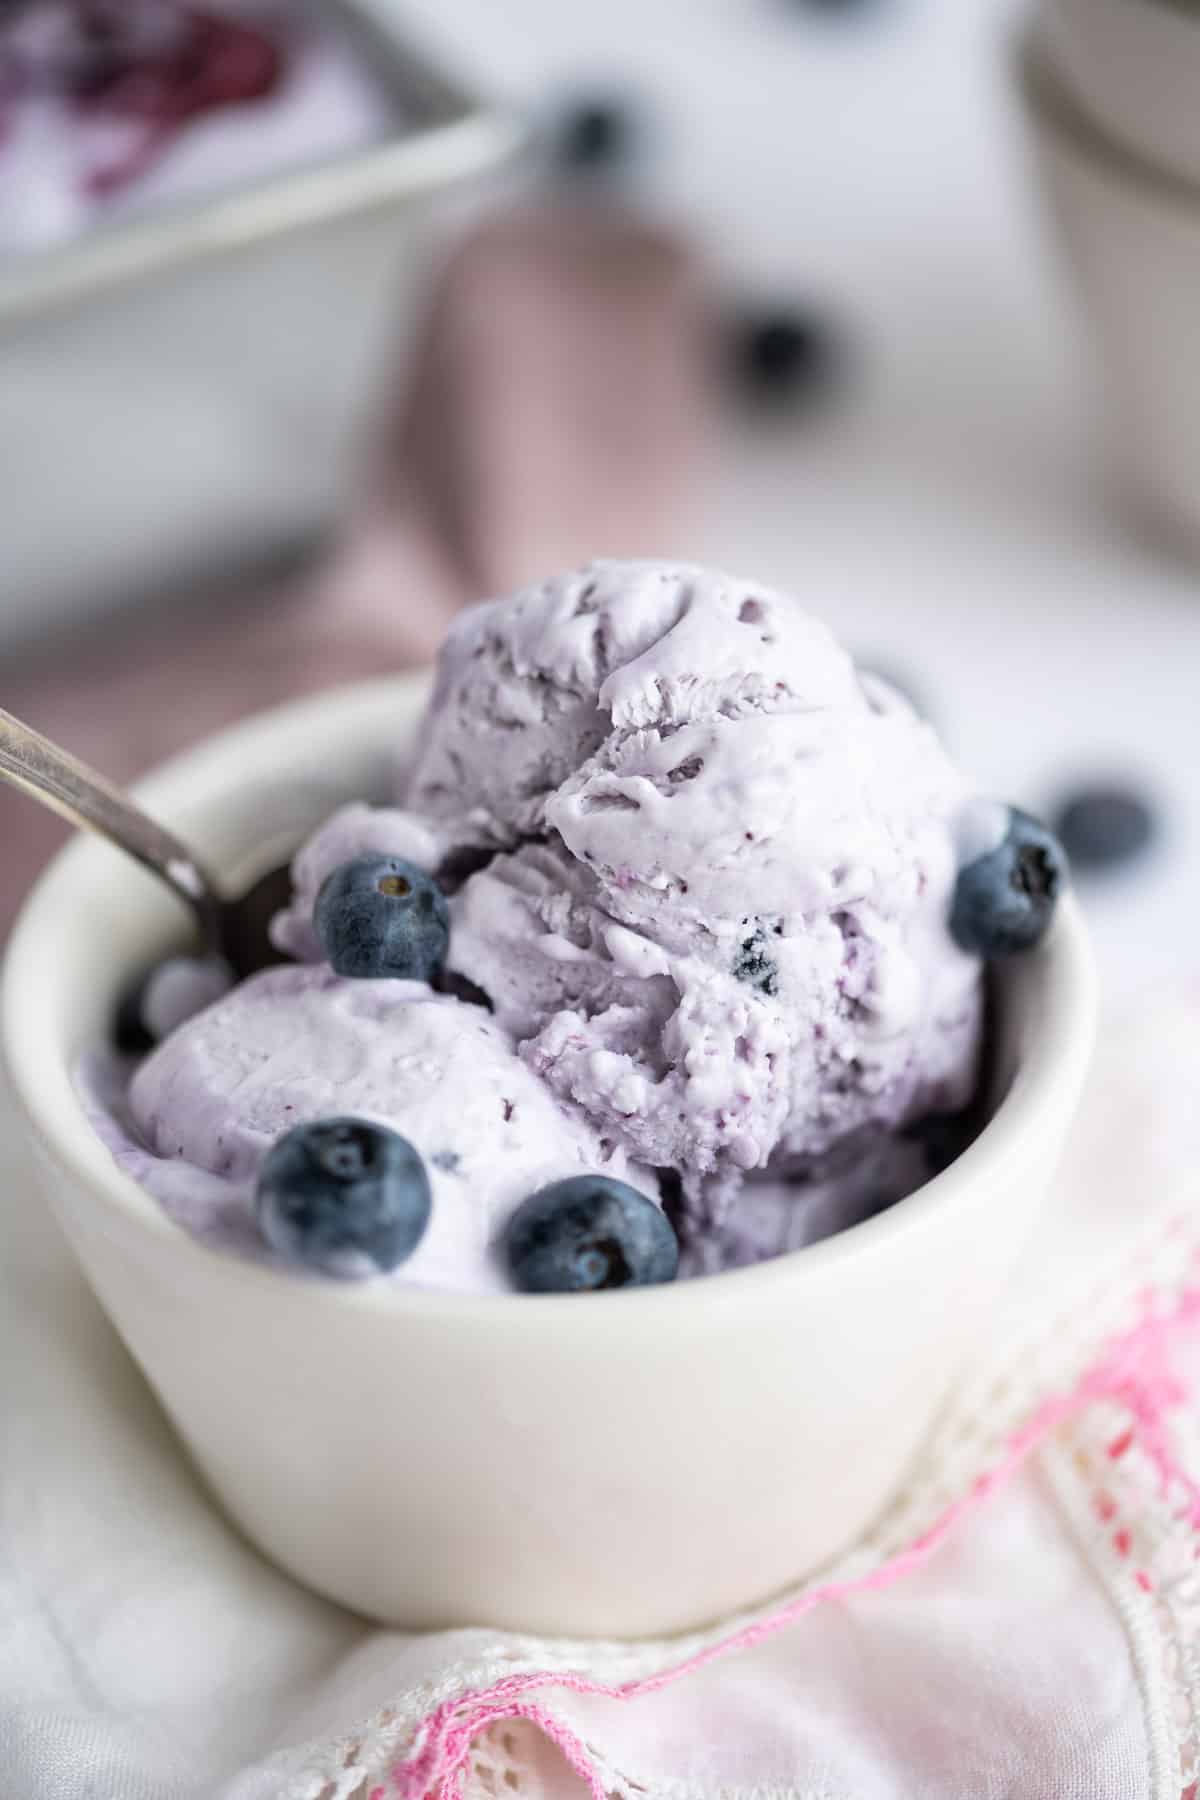 A bowl of no-church blueberry ice cream set in a white bowl garnished with blueberries.